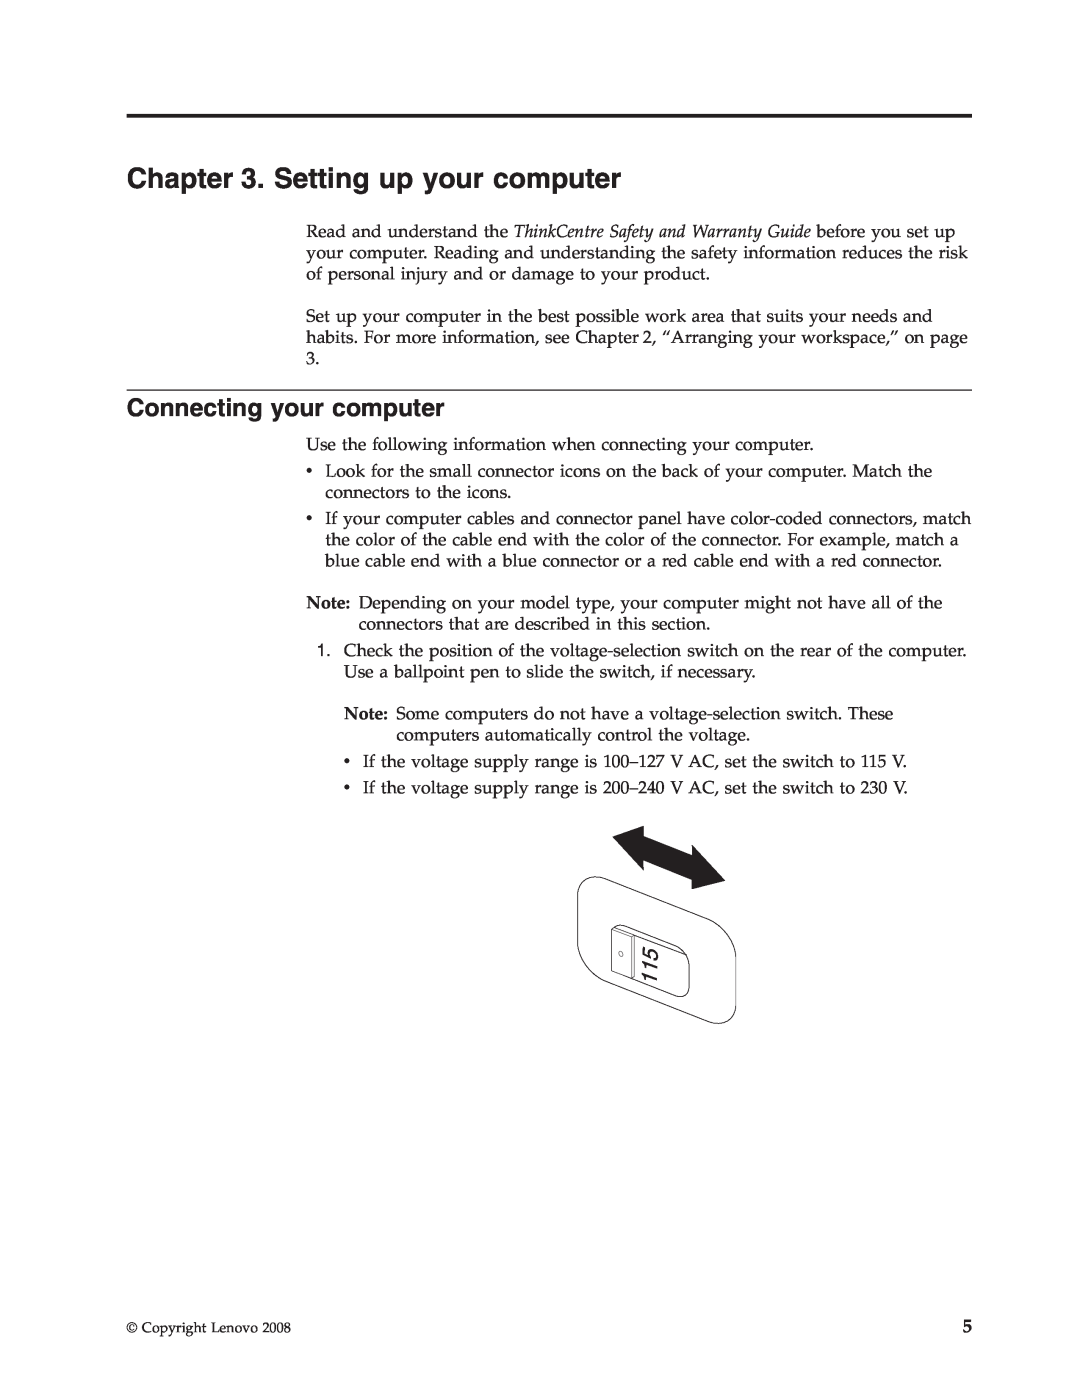 Lenovo 6306 manual Setting up your computer, Connecting your computer 